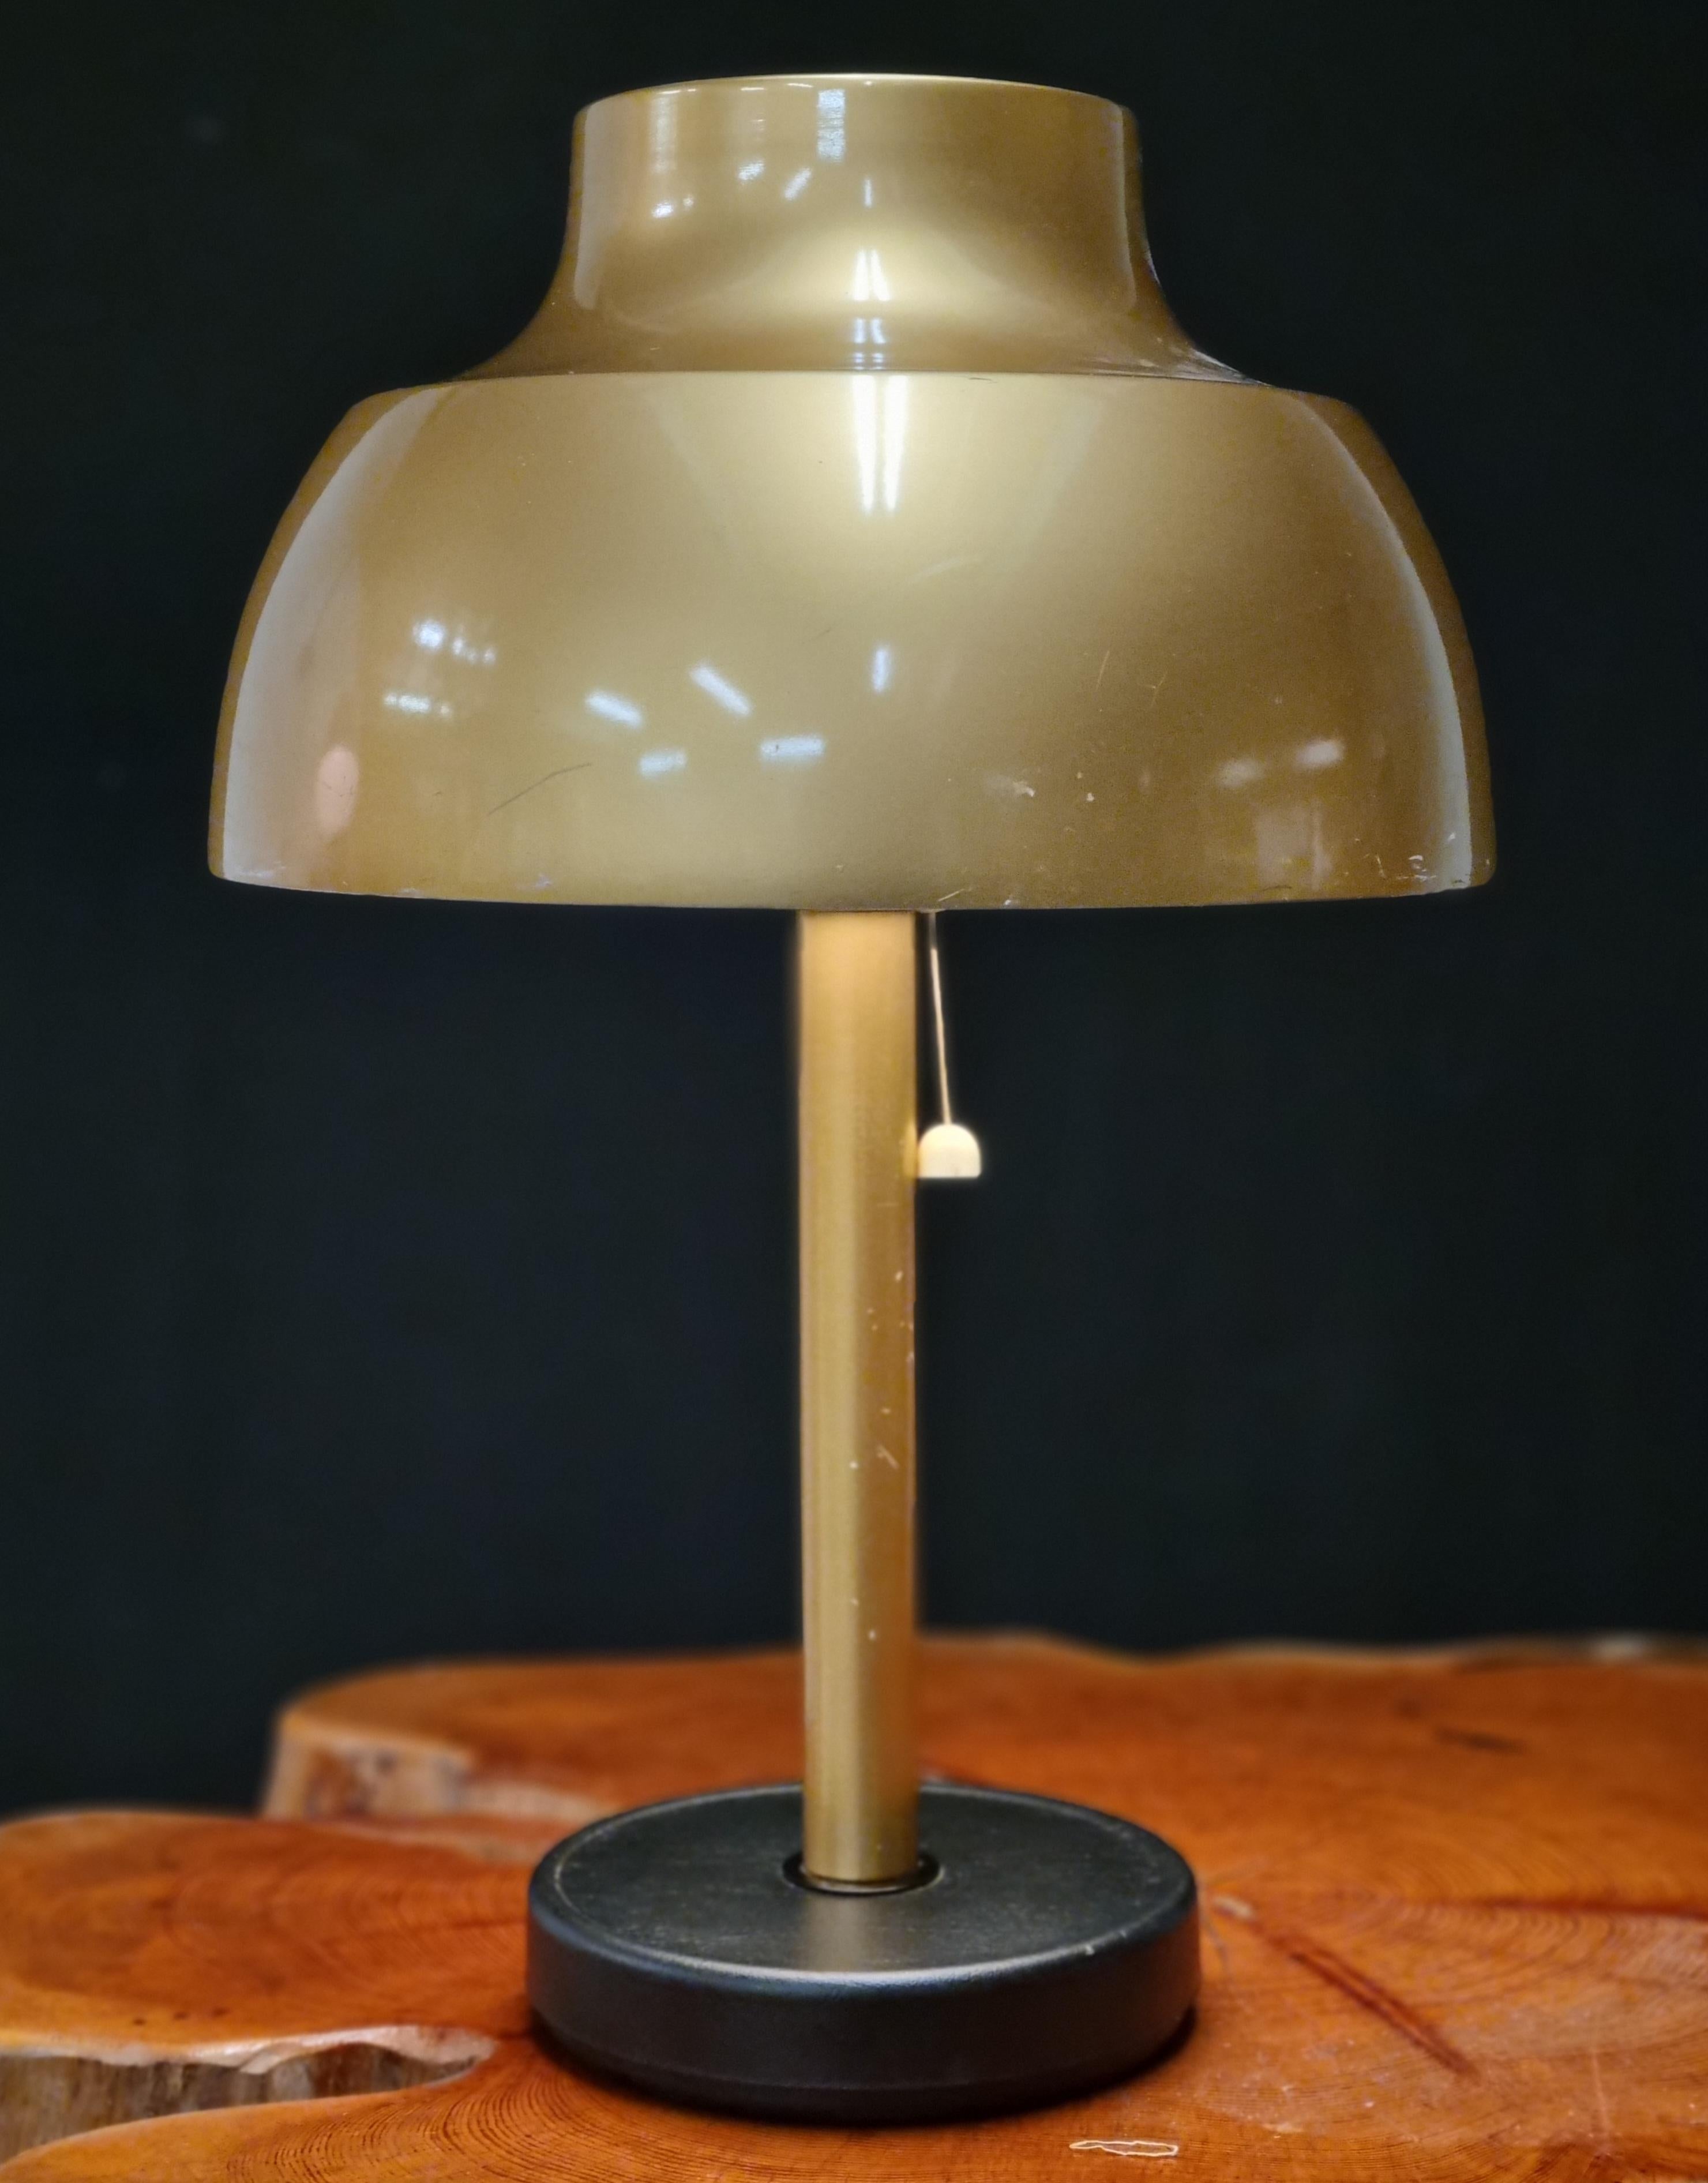 This is a very harmonious and symmetrical table lamp by designer Heikki Turunen from the 1970s-80s. Urbanization was fast during 1970-80s and this table lamp represents well that period and was designed for hotel and office use.
This lamp in